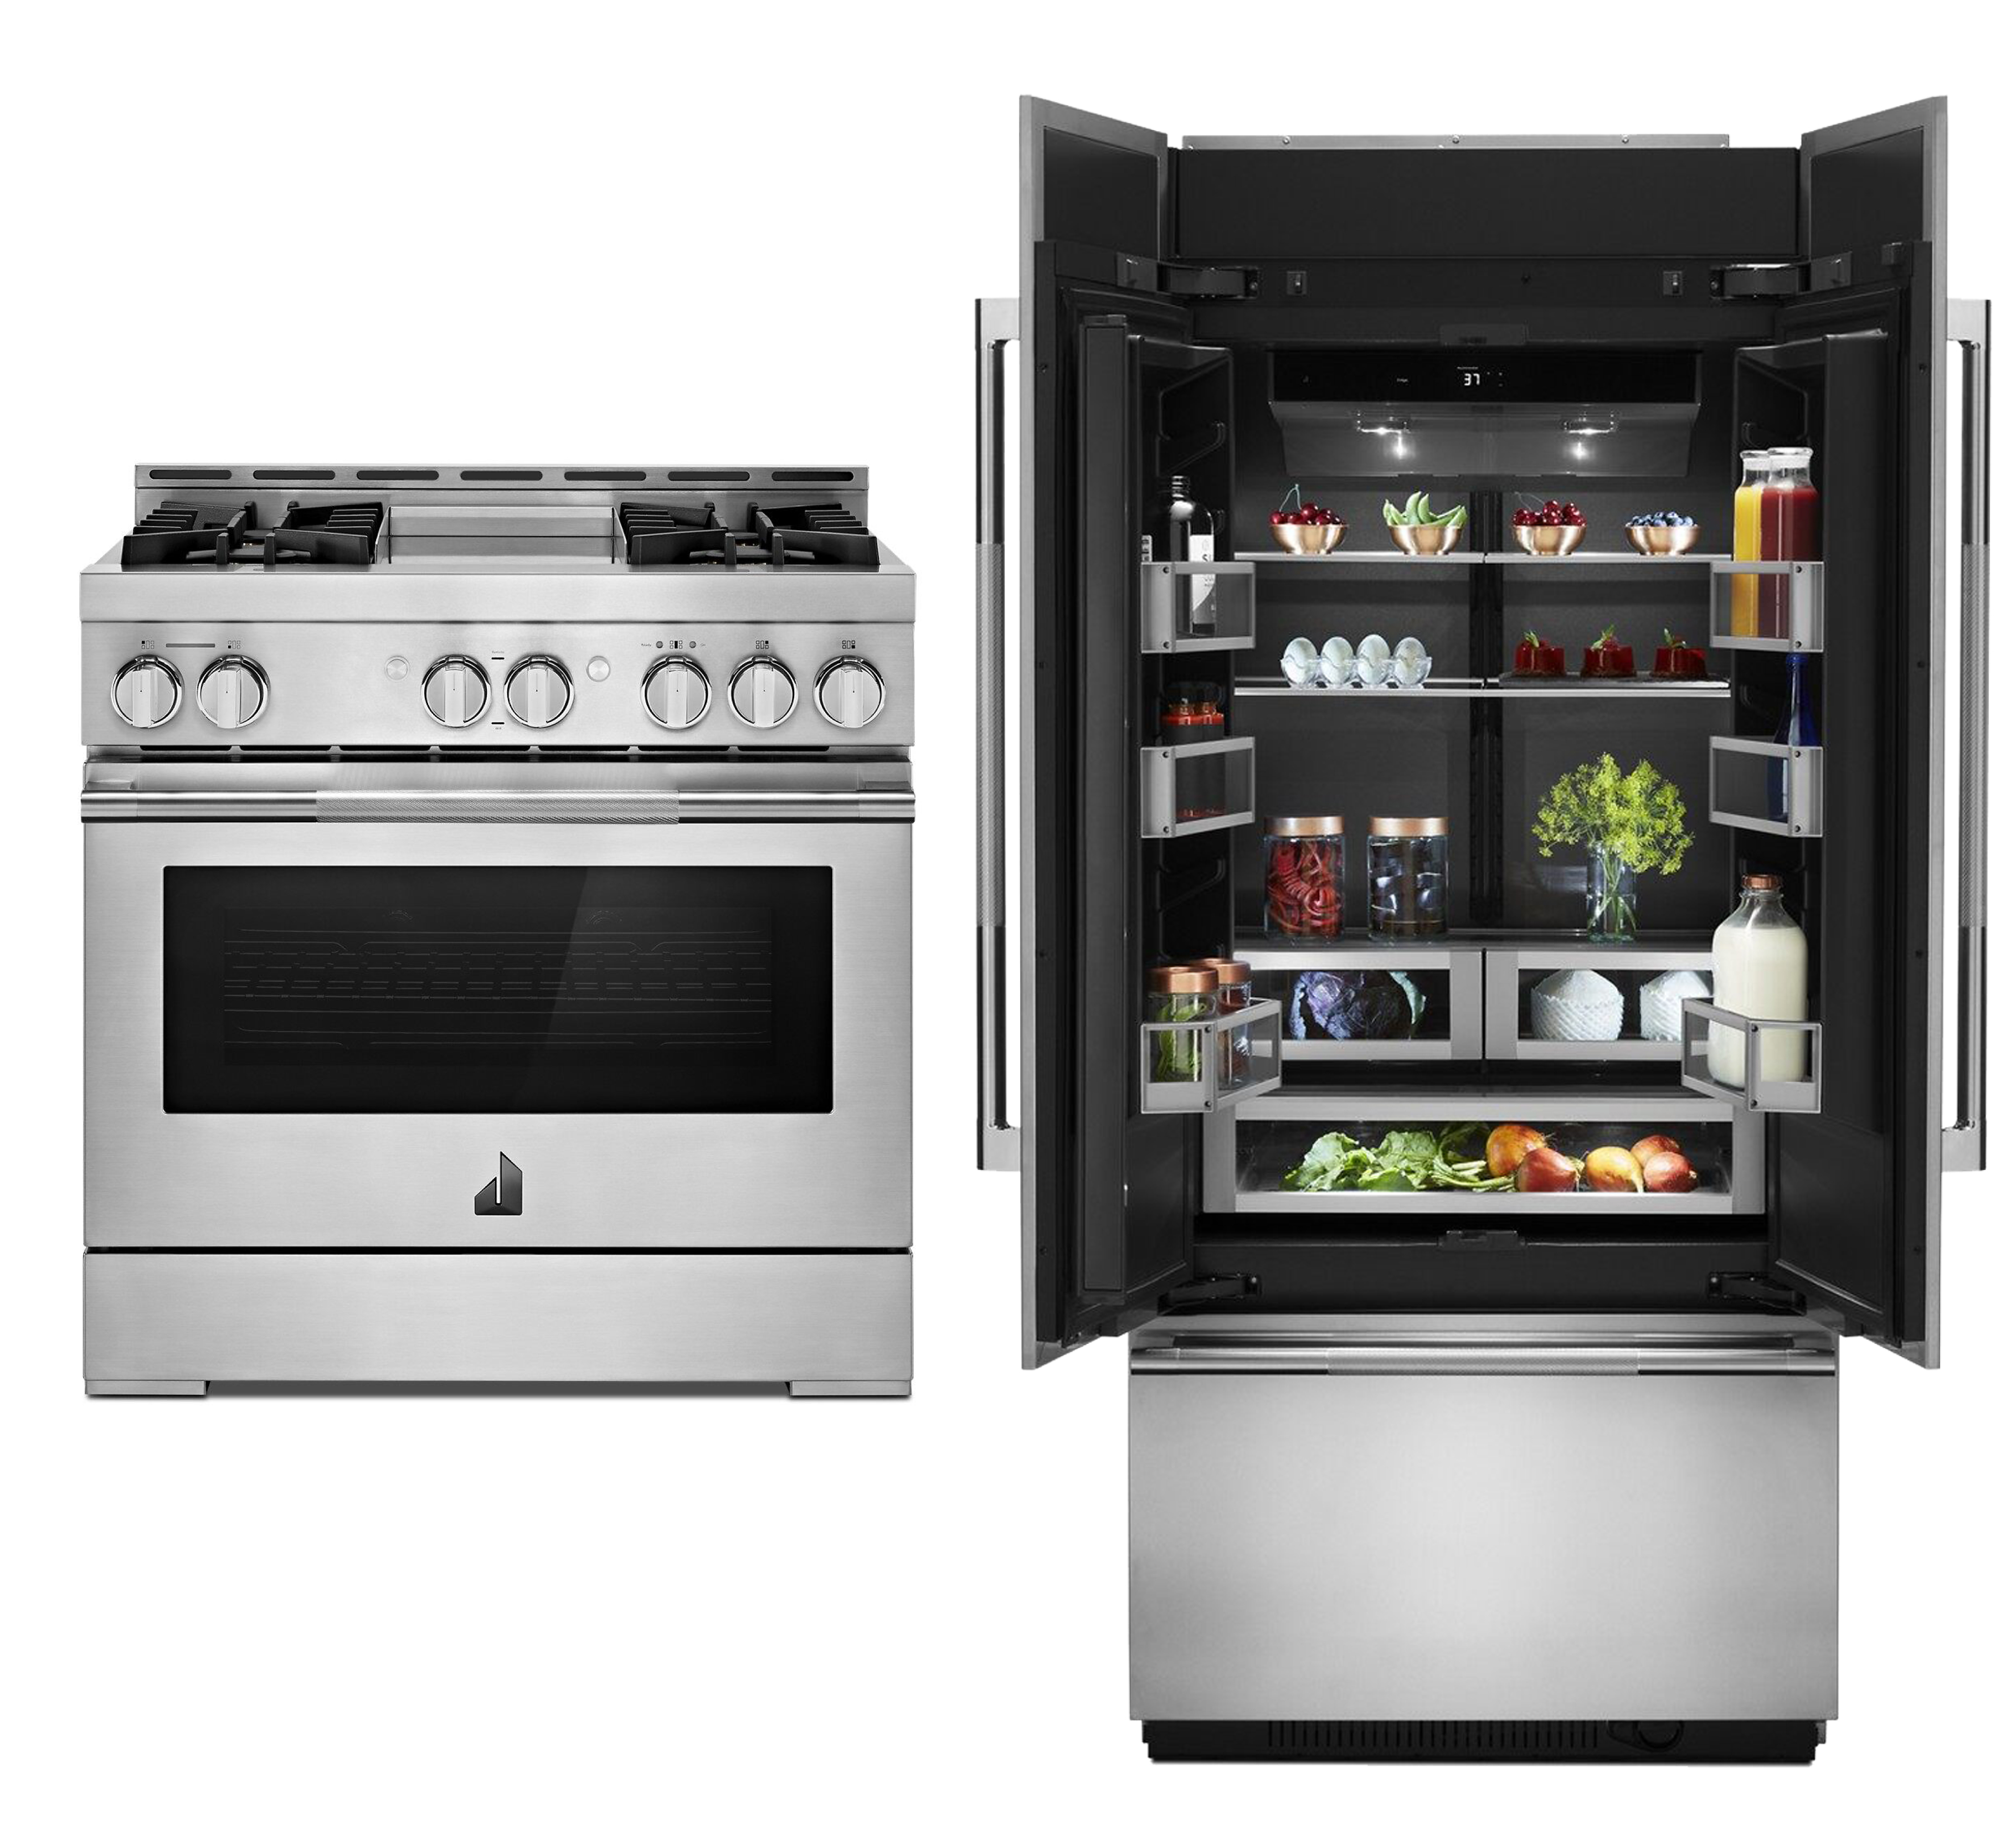 A JennAir® RISE™ Professional Range and a Built-In French Door Refrigerator.